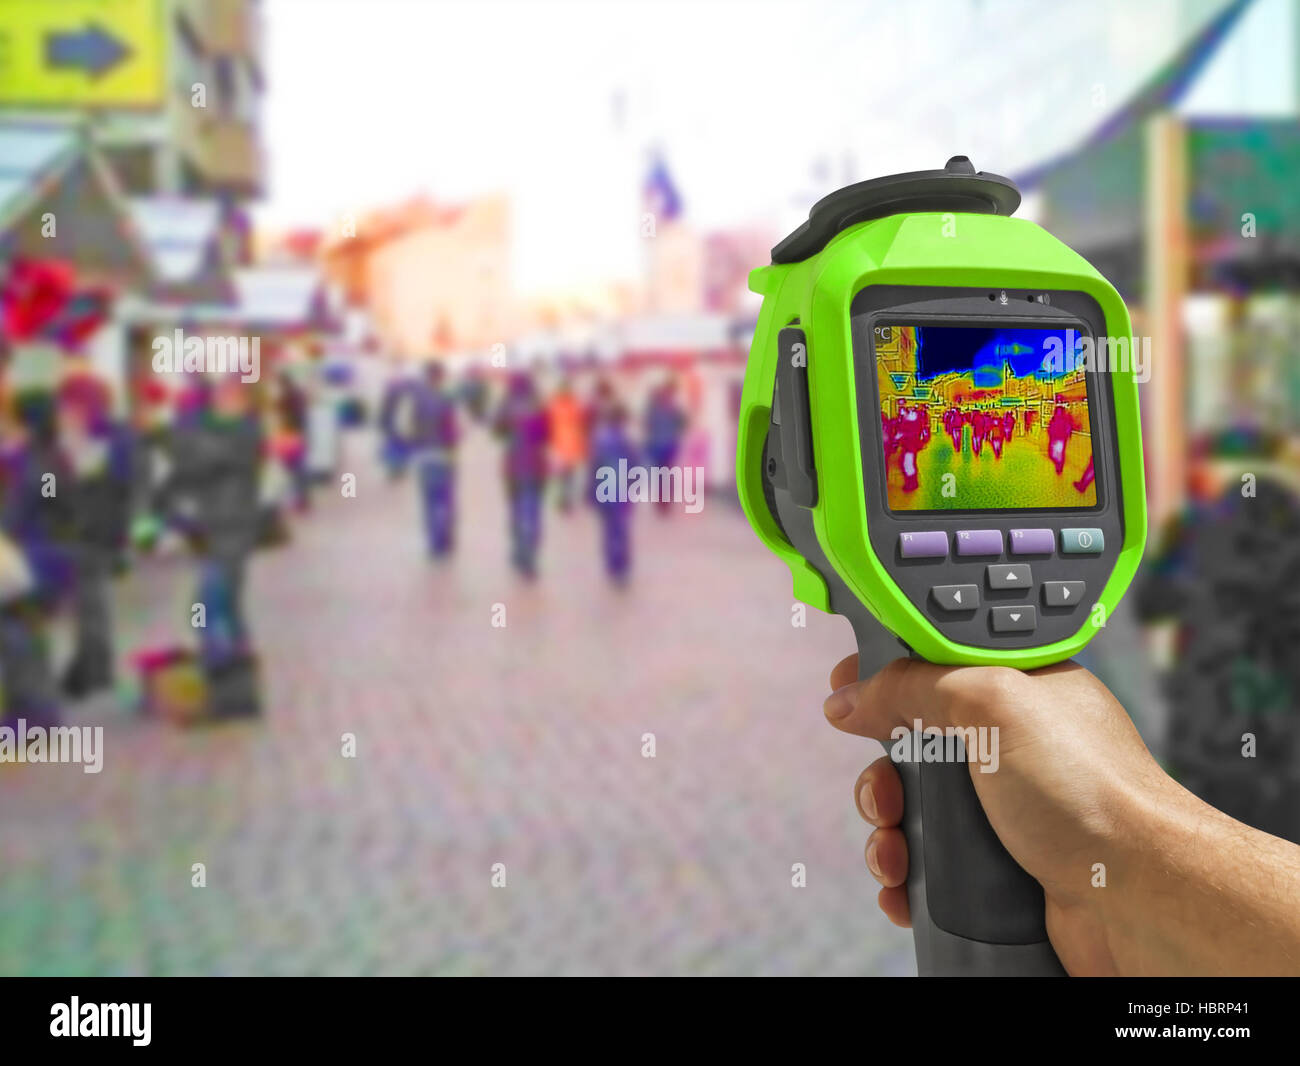 Recording with Thermal camera people walking the city streets Stock Photo